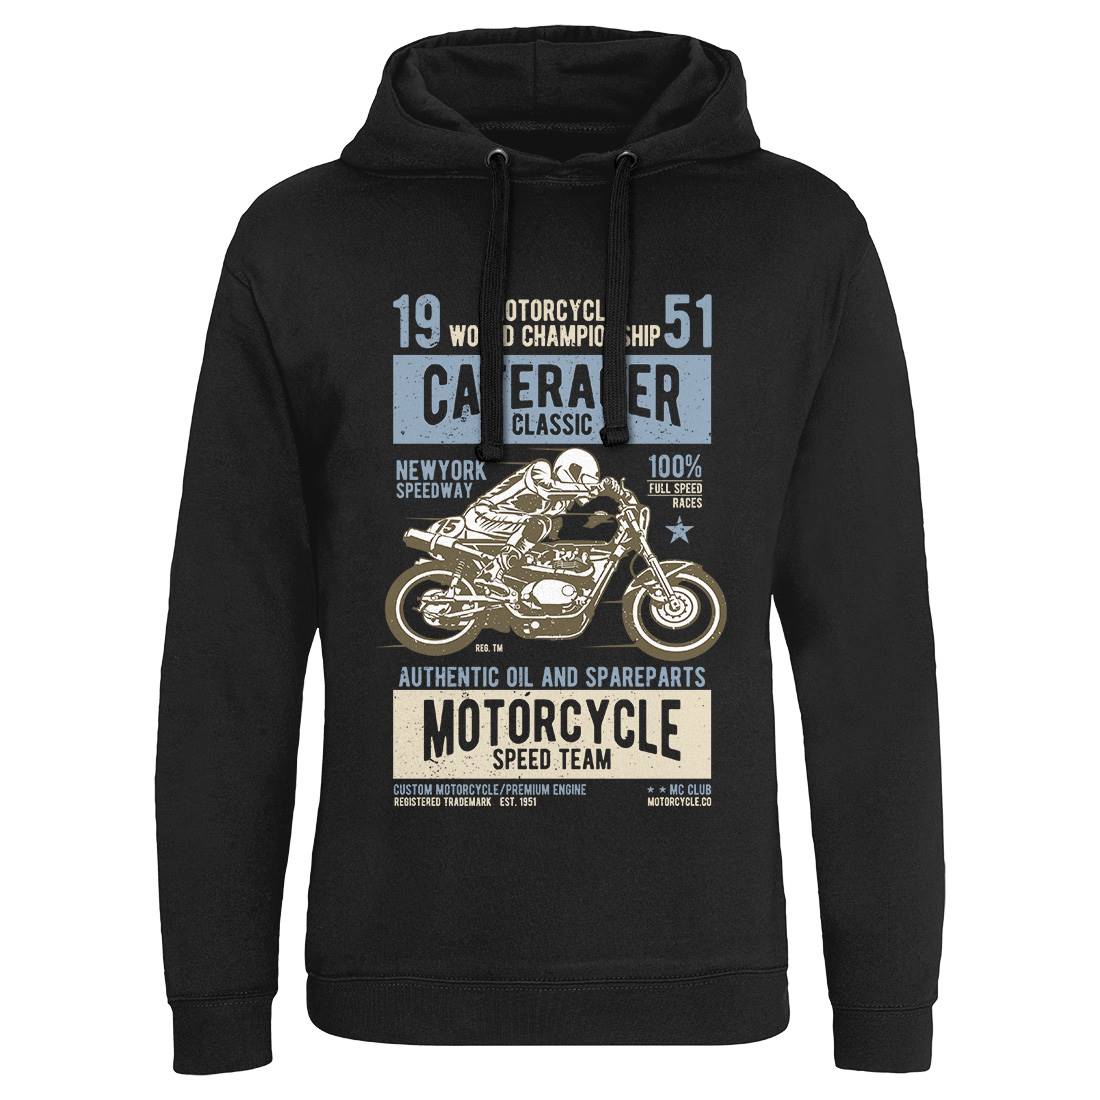 Caferacer Mens Hoodie Without Pocket Motorcycles A629